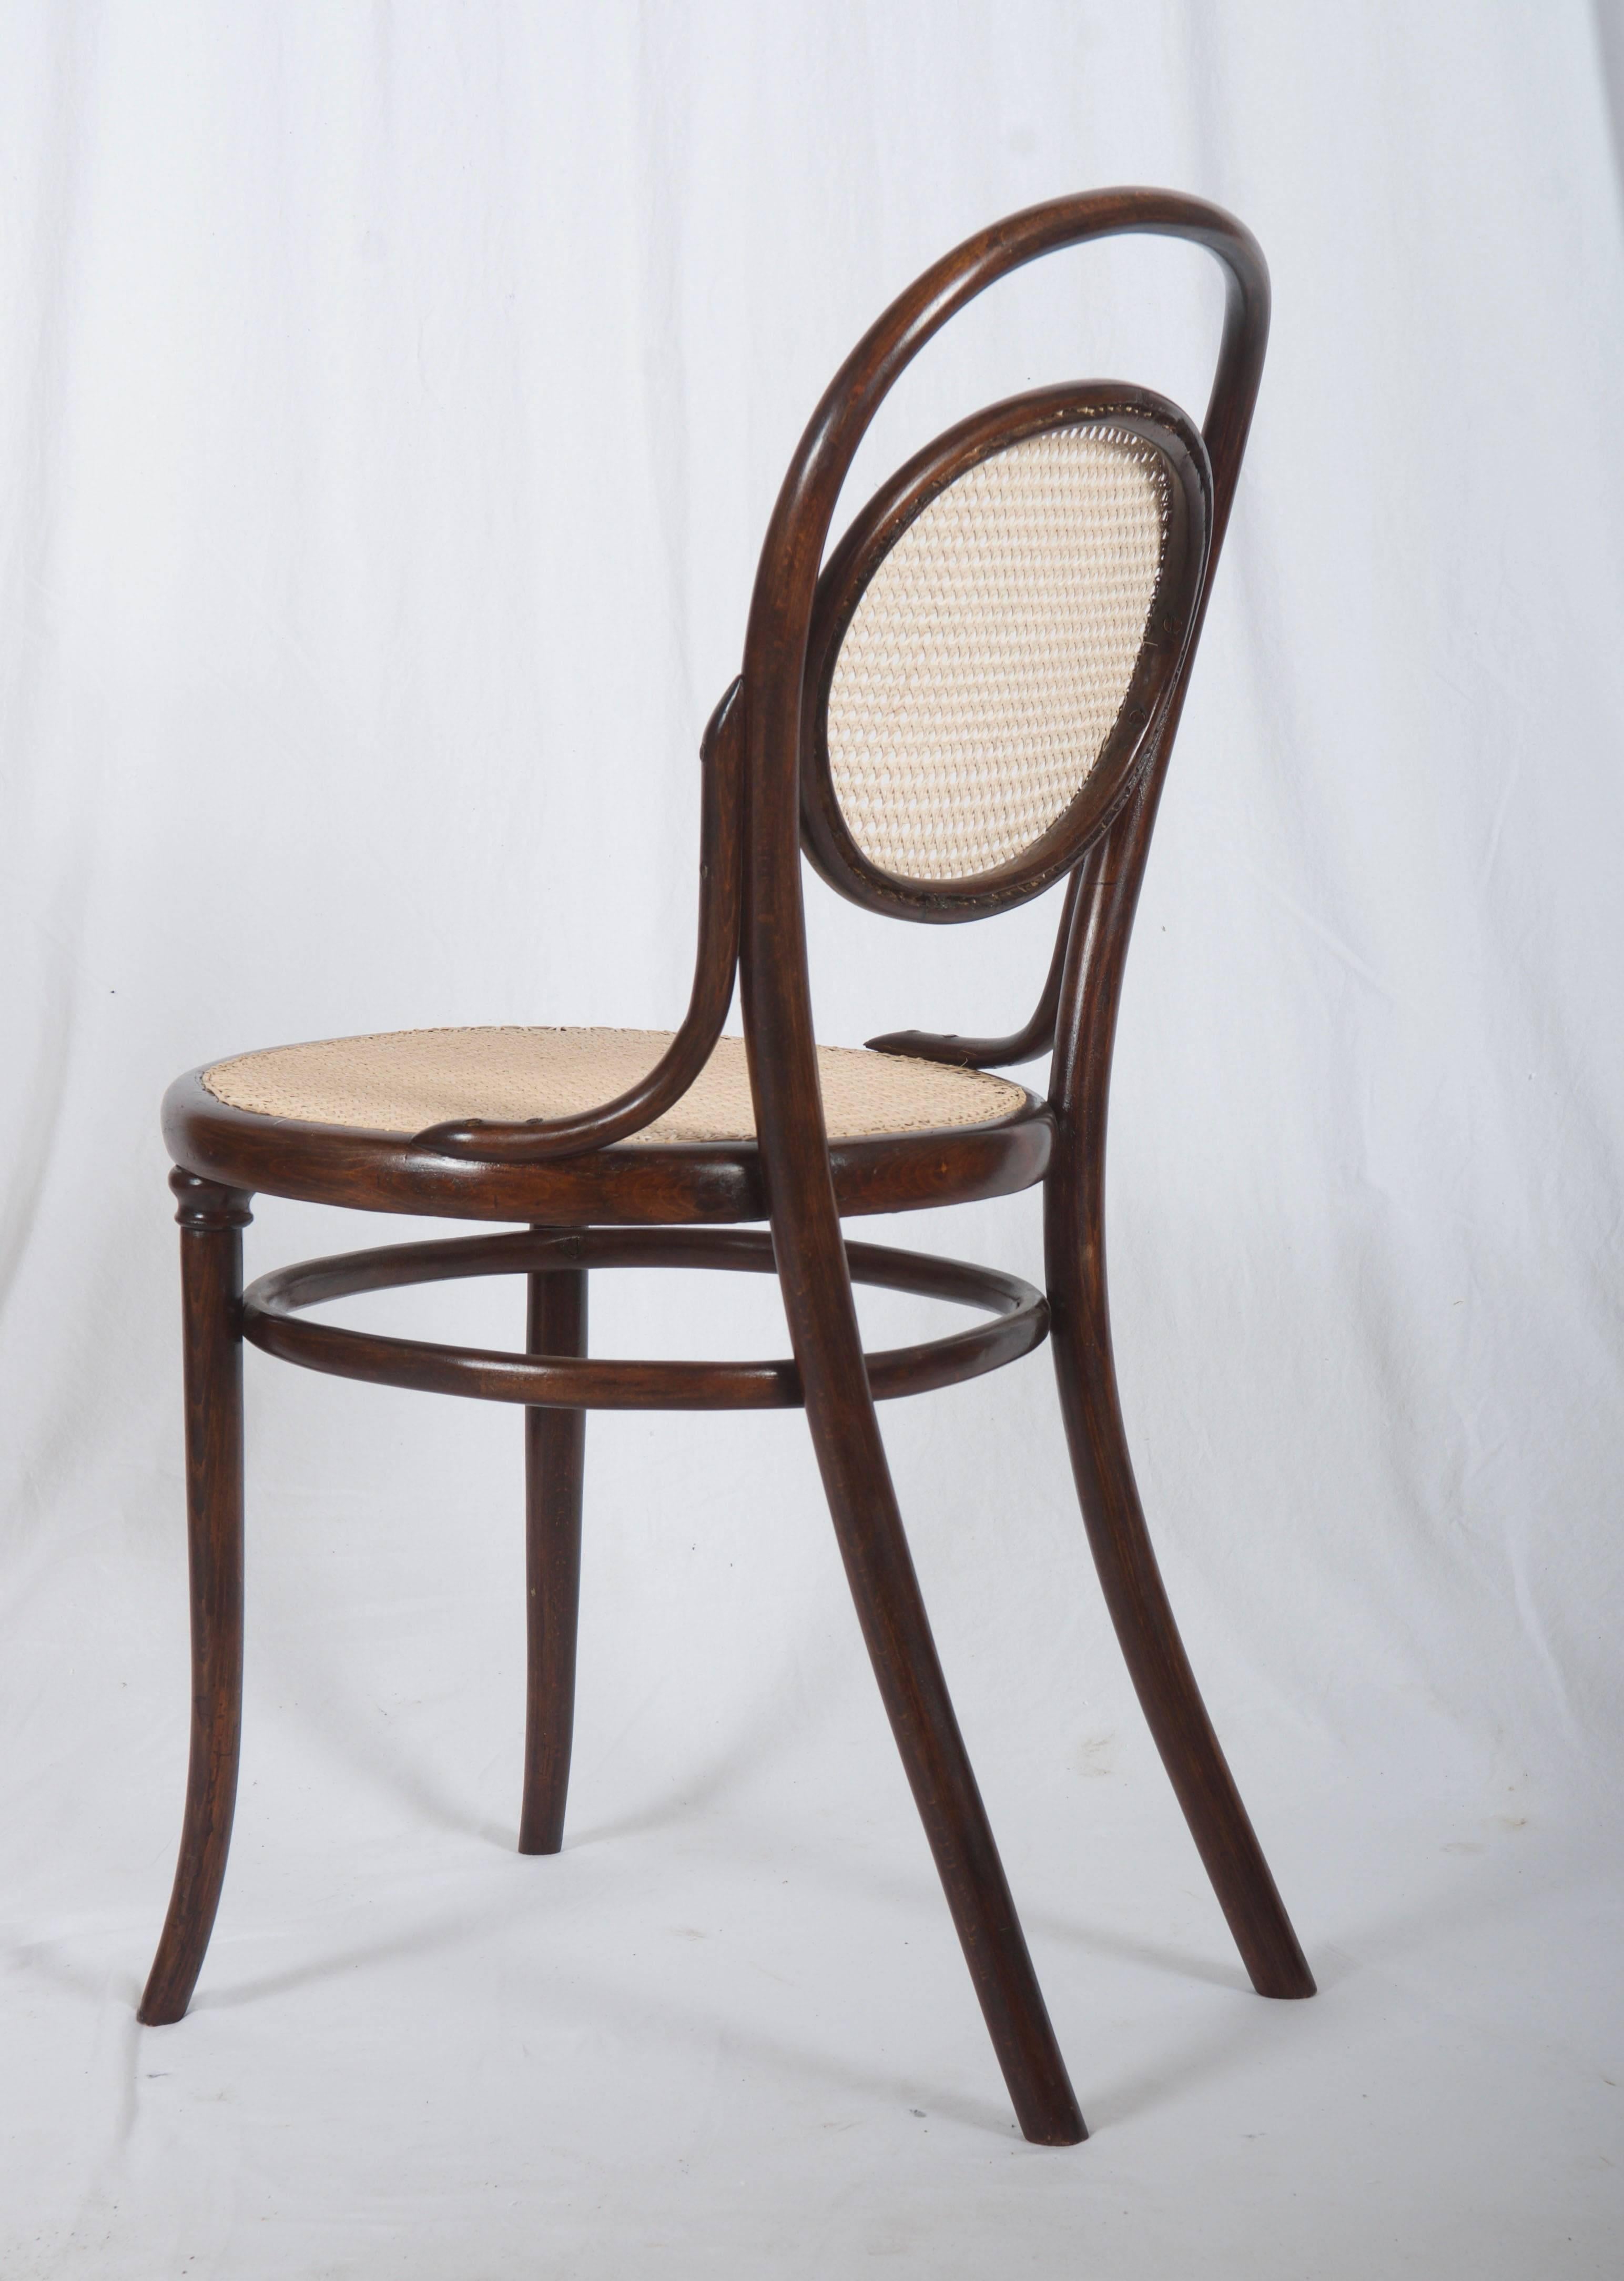 Vienna Secession Bentwood Chair Thonet Style